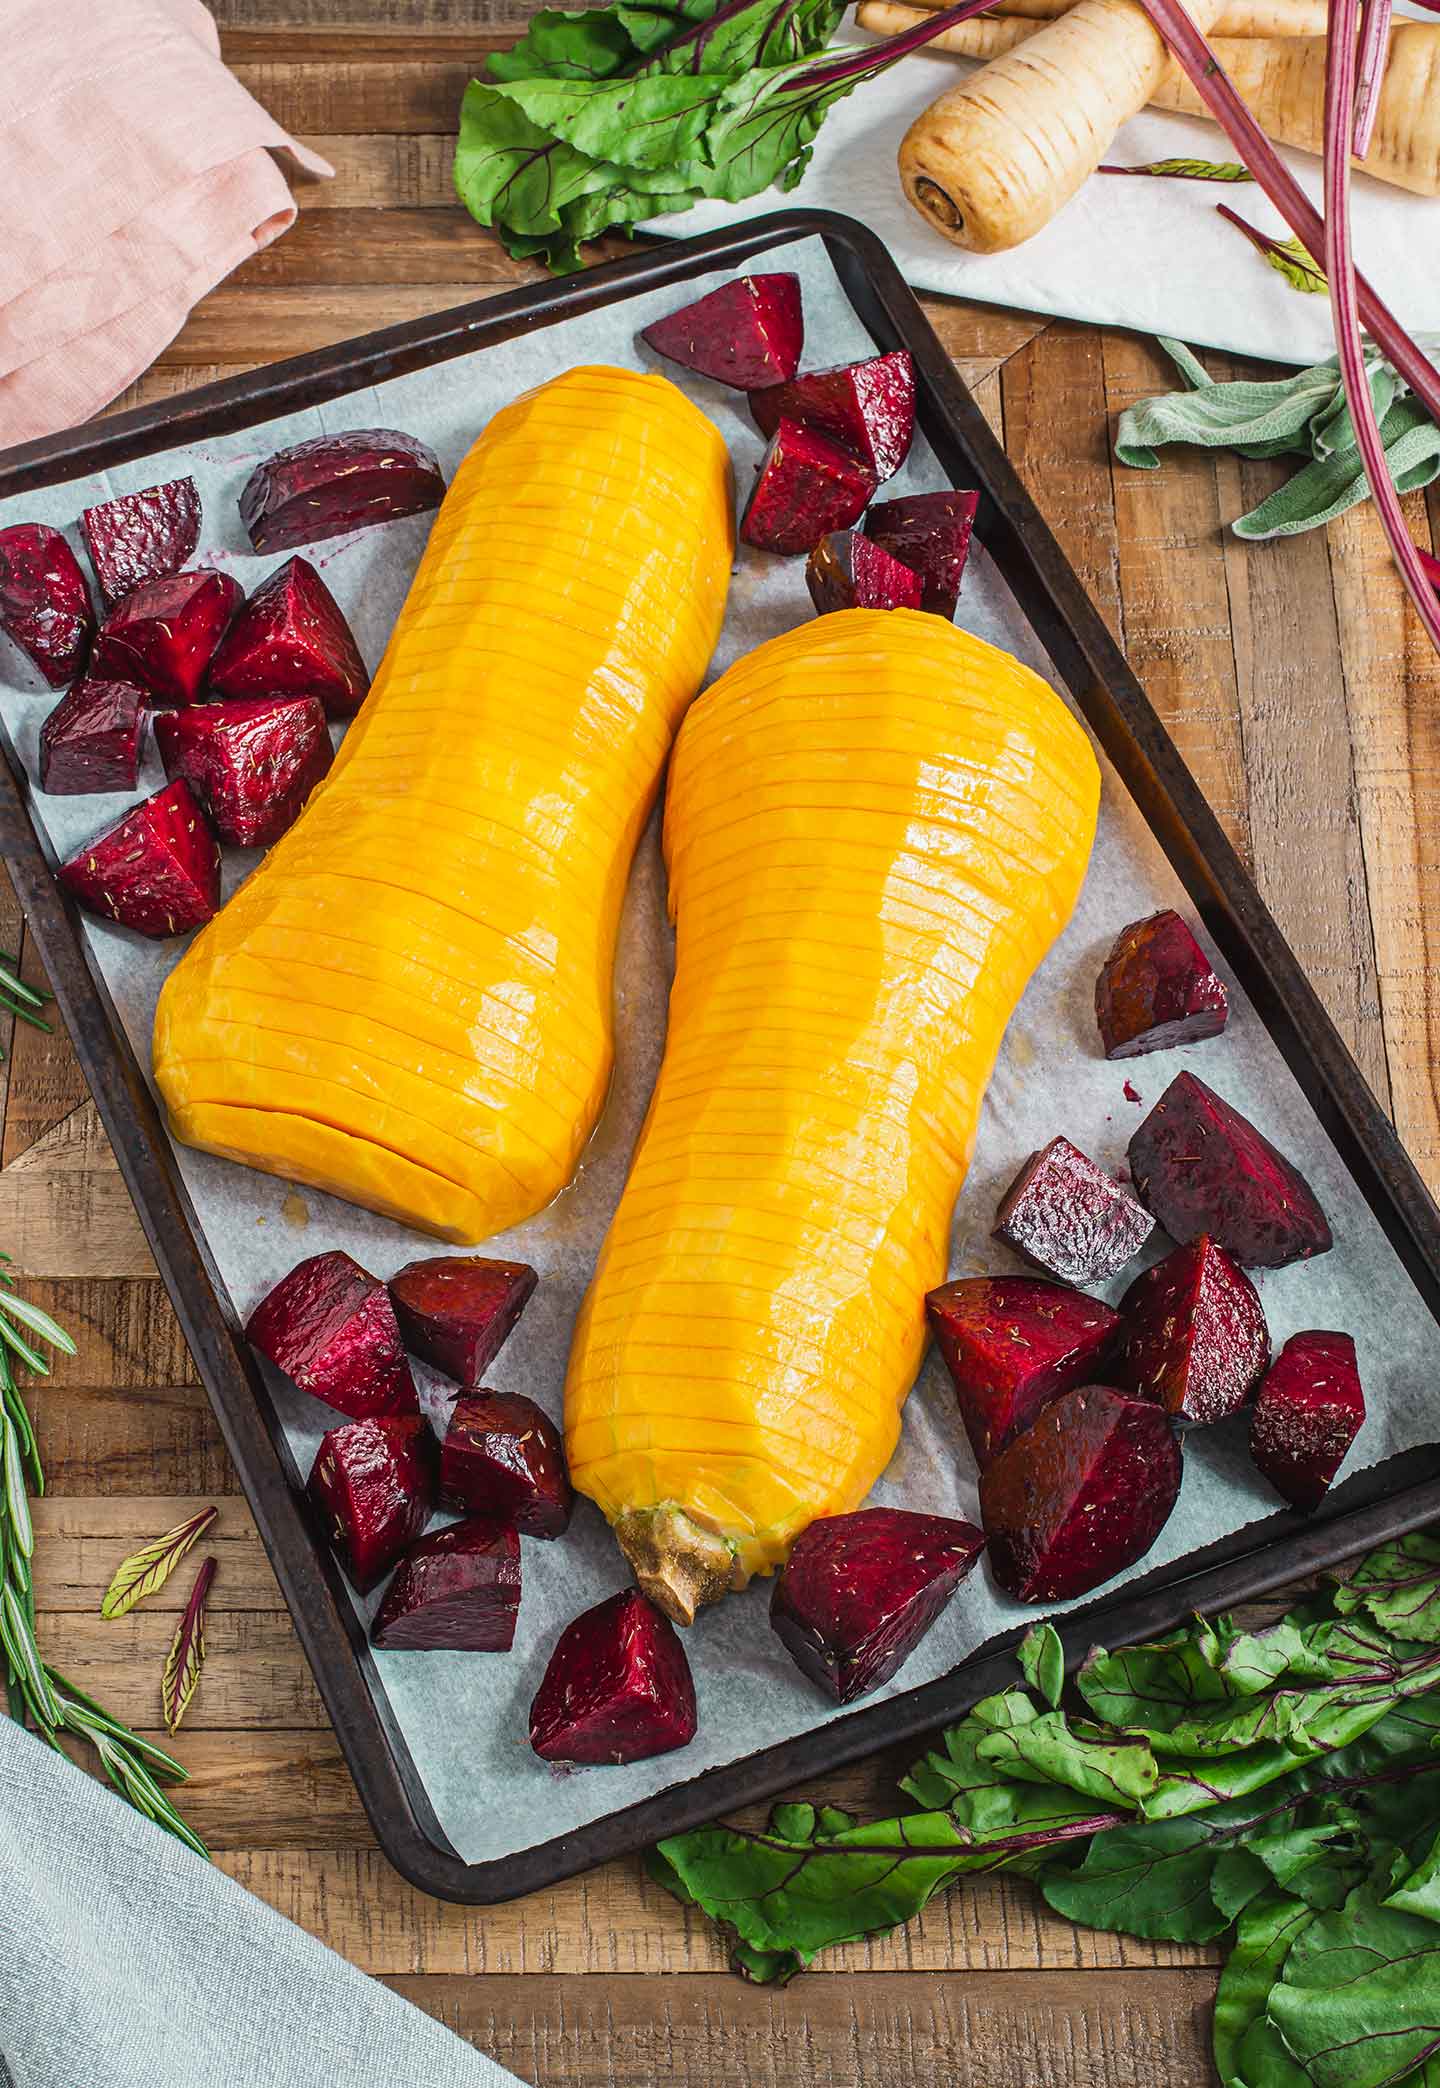 Top down view of hasselback butternut squash and raw beets on a baking tray lined with parchment paper.